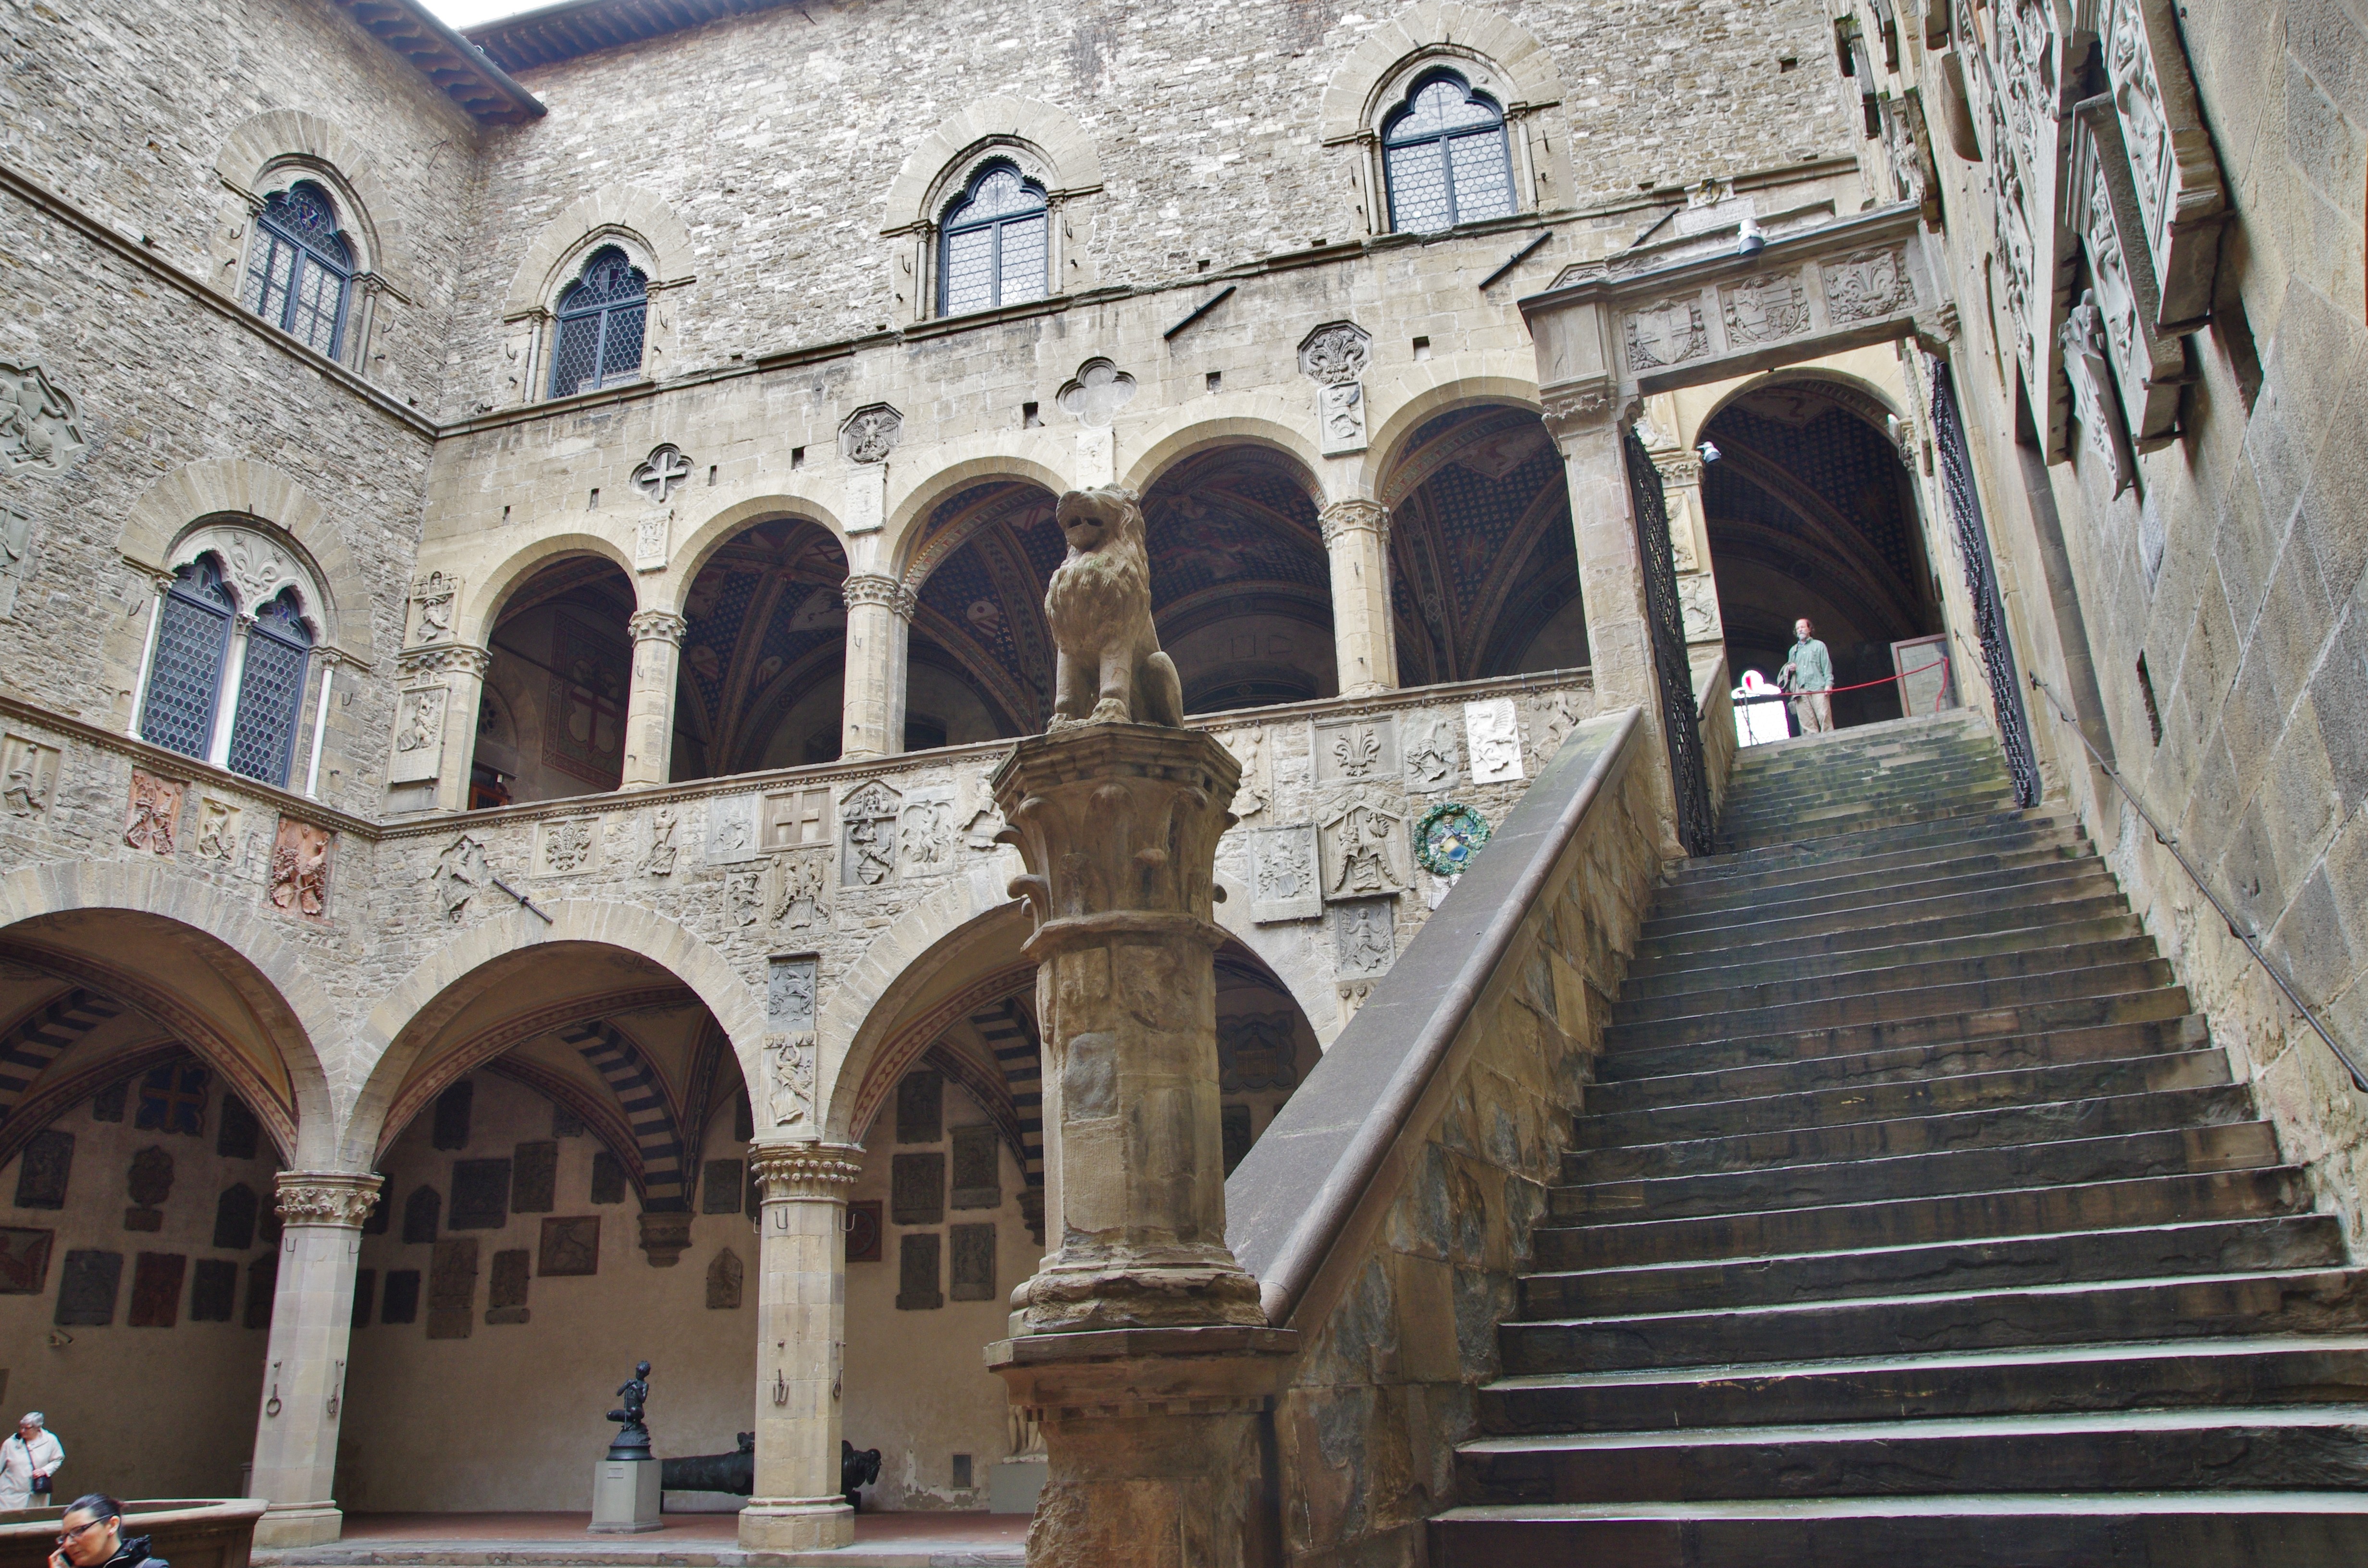 Museo Nazionale del Bargello (Bargello National Museum), Florence: All year